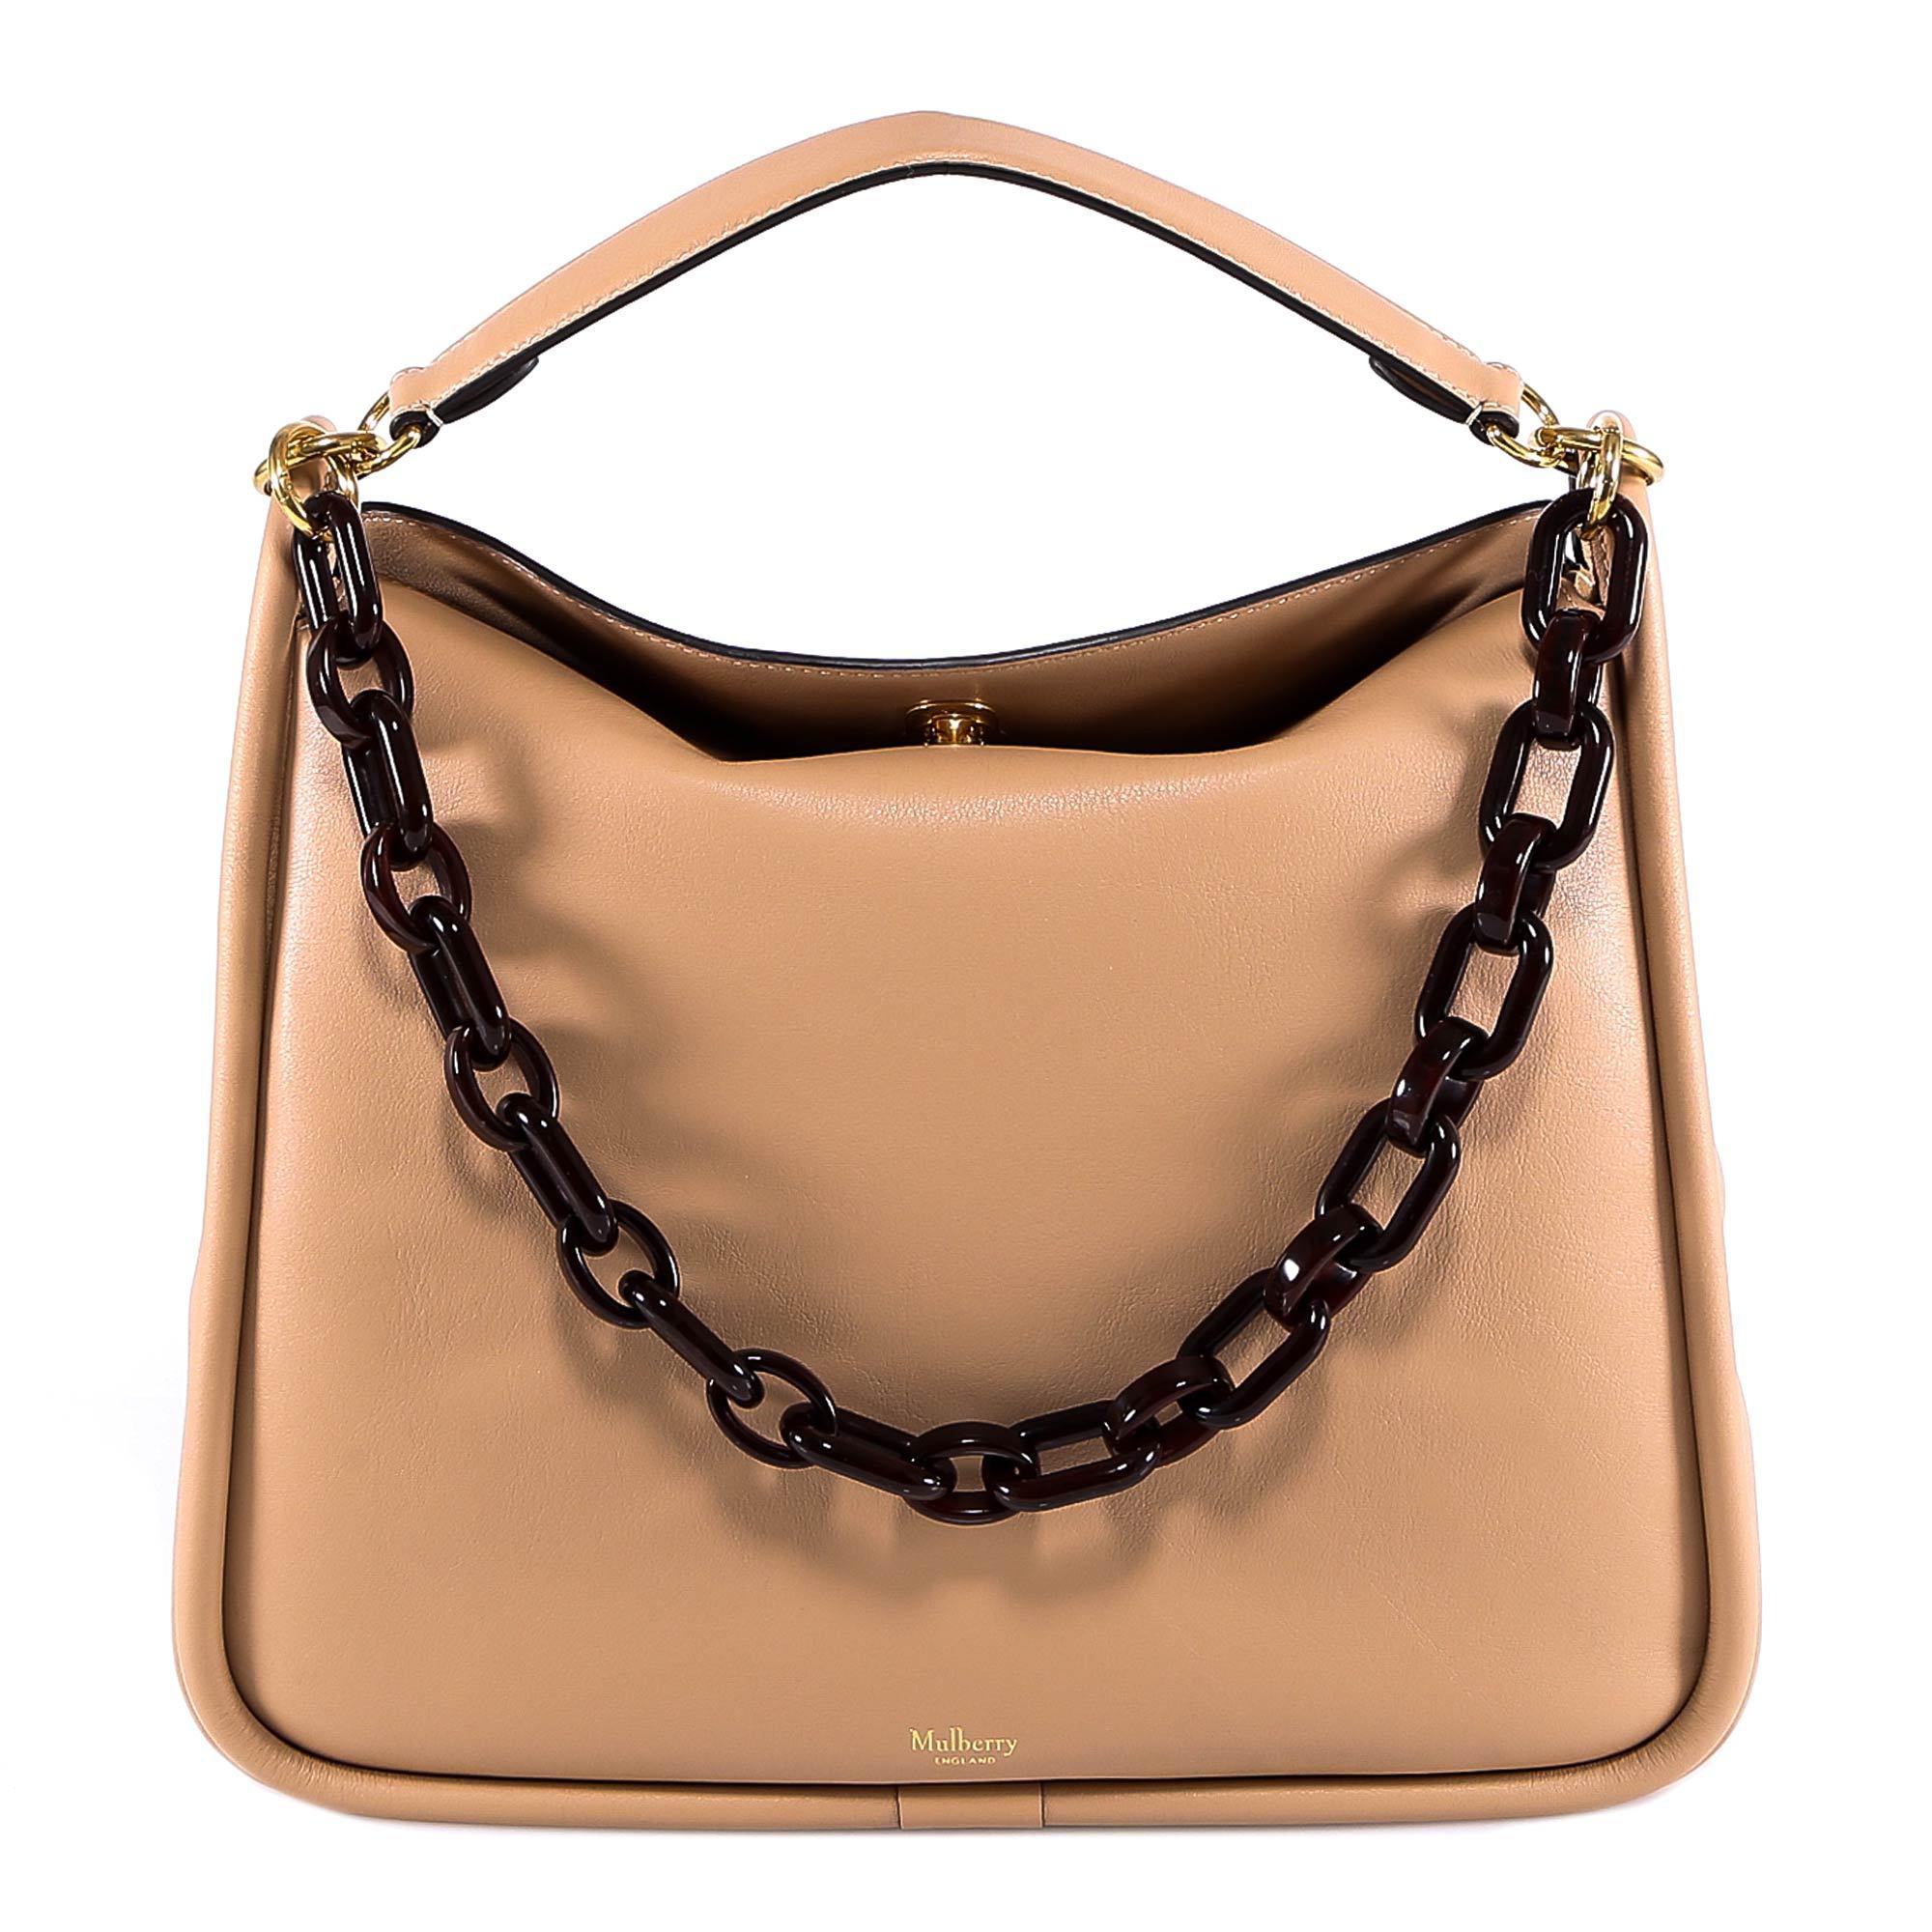 Lyst - Mulberry Leighton Shoulder Bag in Natural